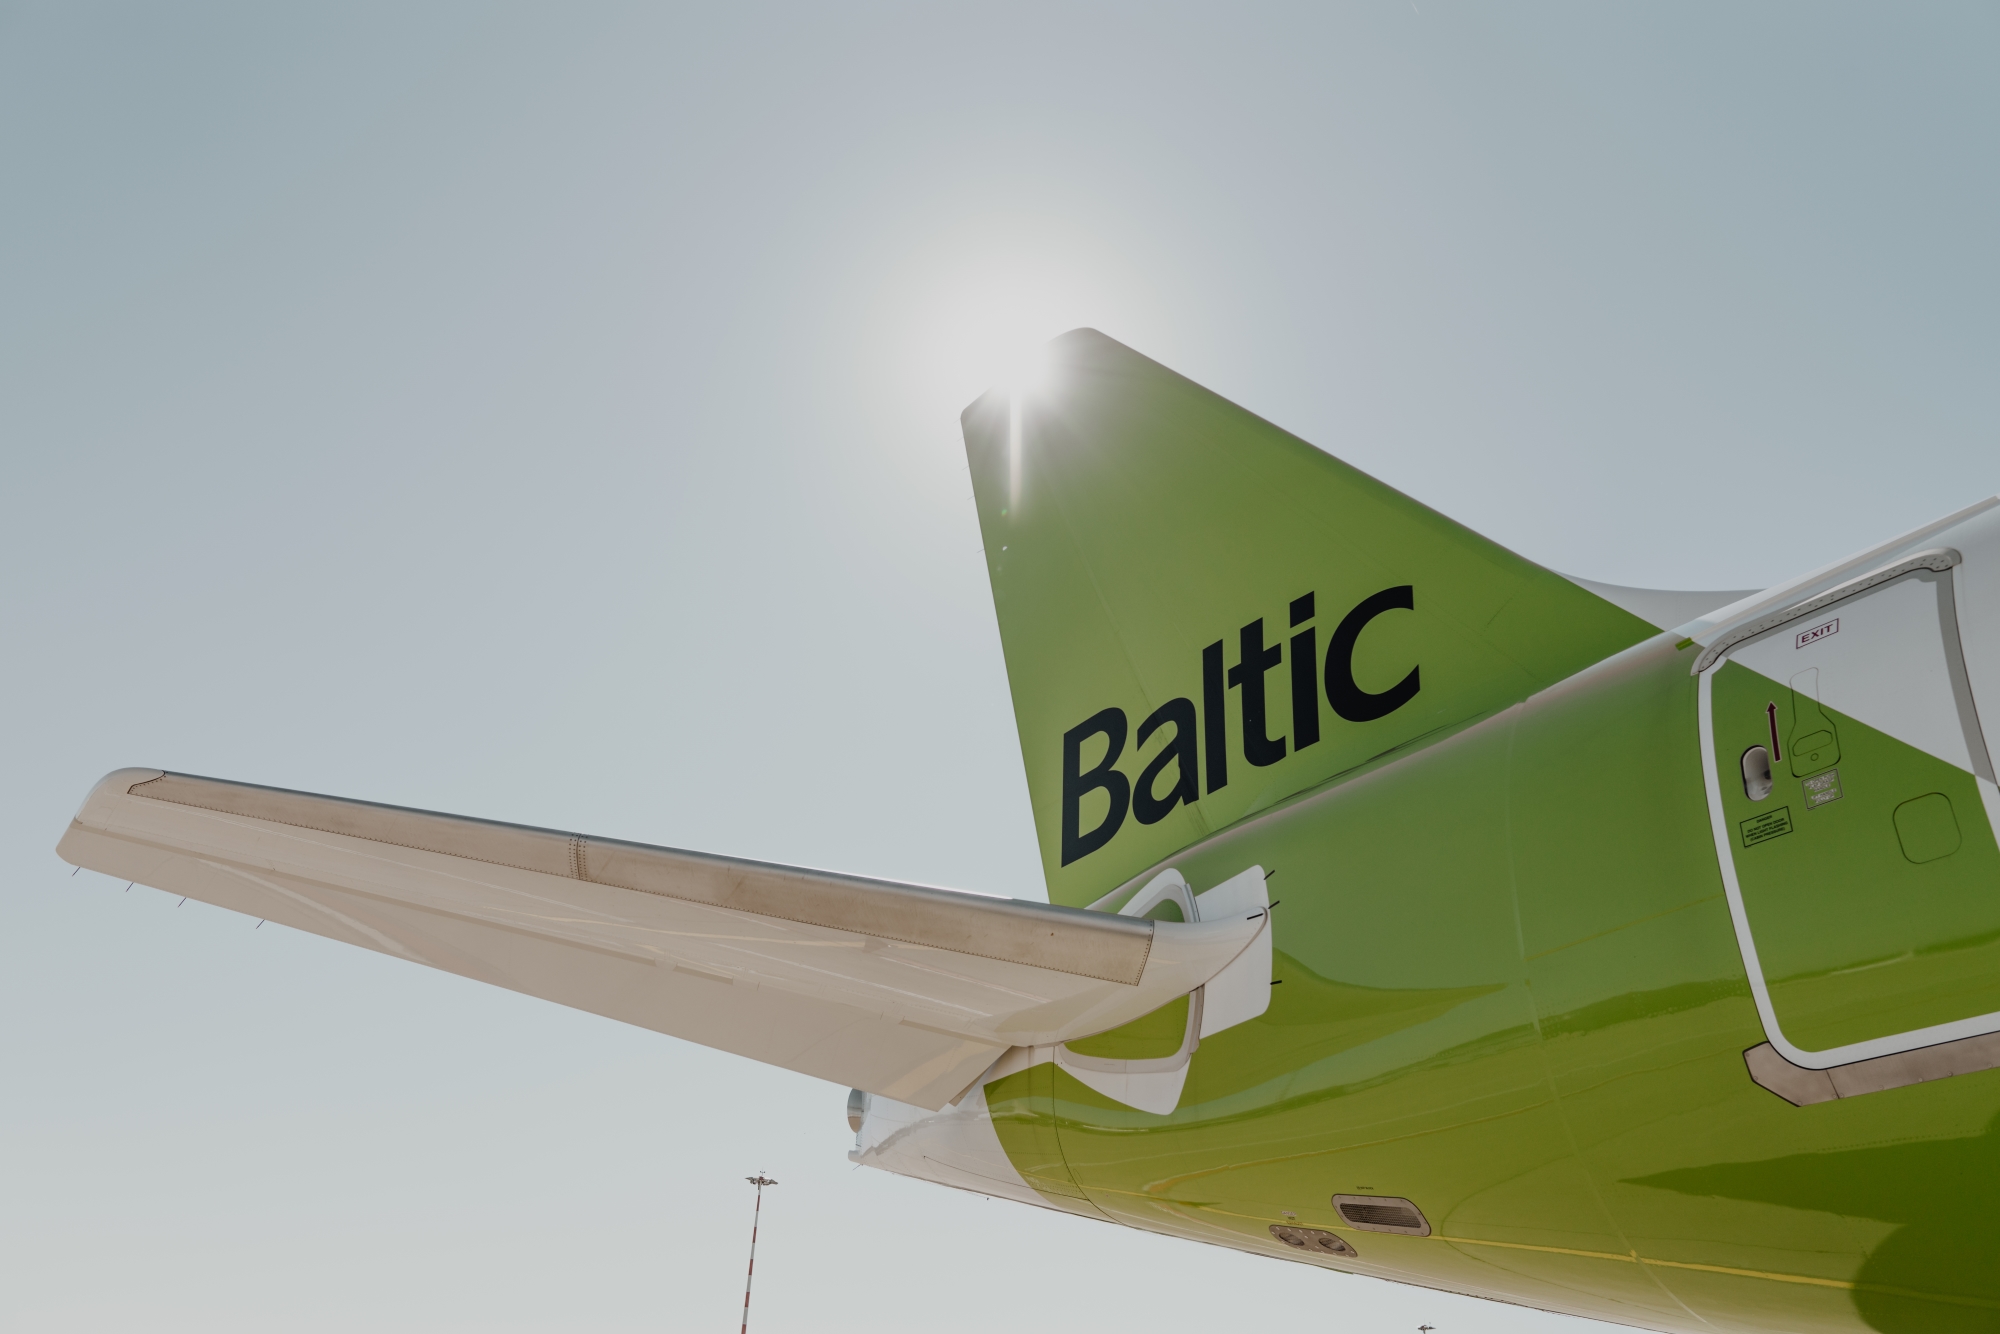 airBaltic announces plans to resume flights to Ukraine once airspace declared open and safe